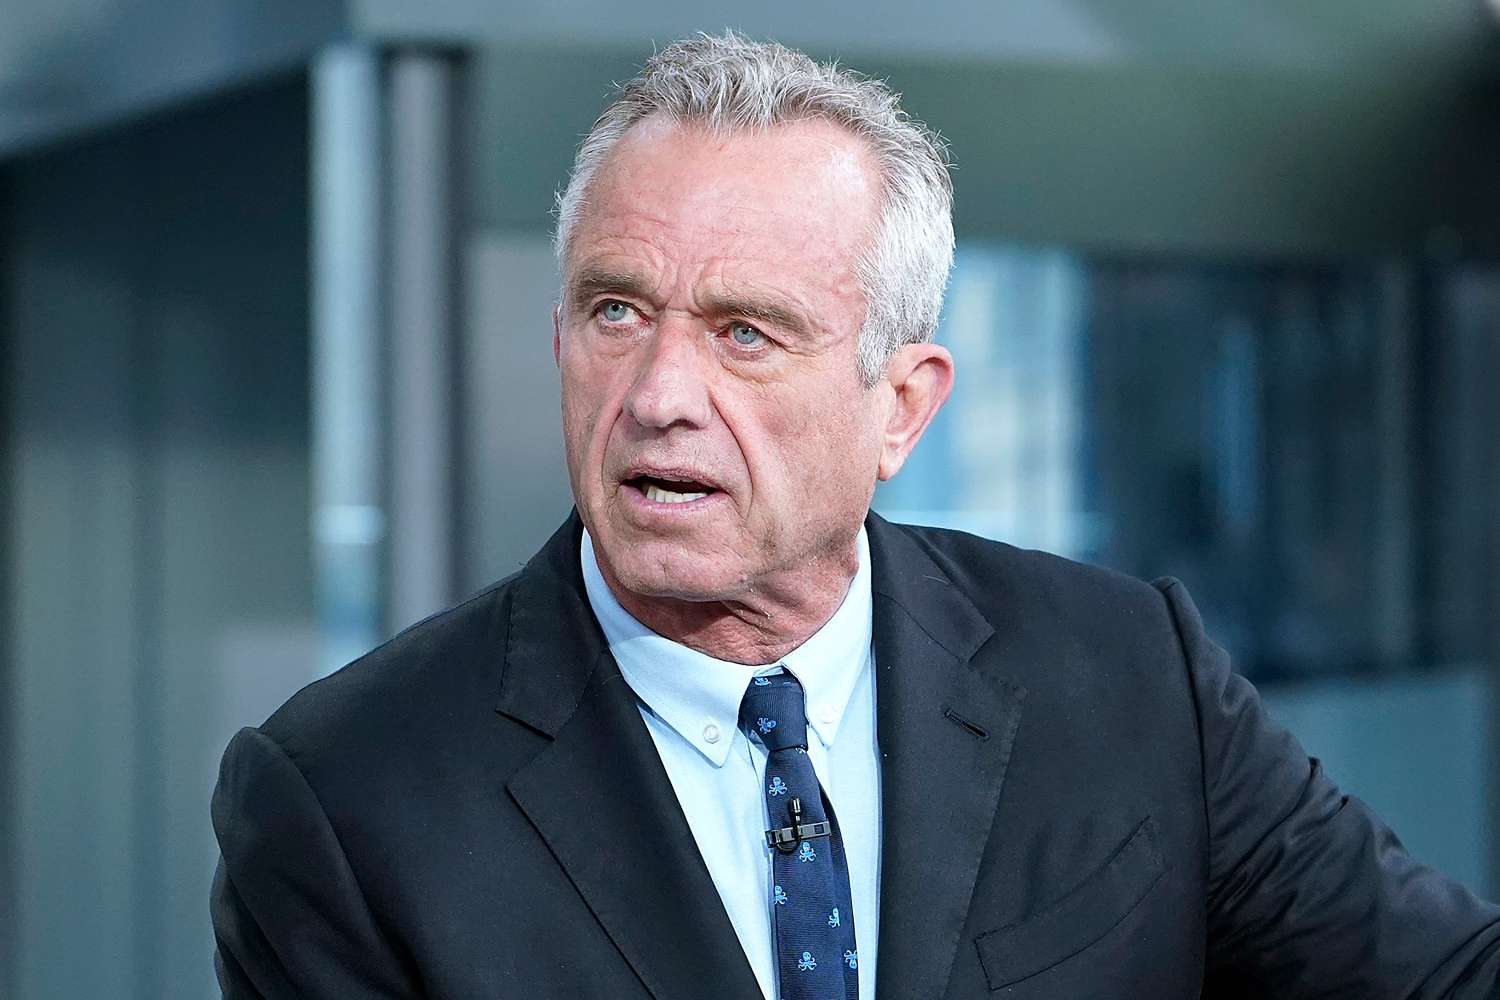 Robert F. Kennedy Jr. Says Doctors Found a Dead Worm in His Brain